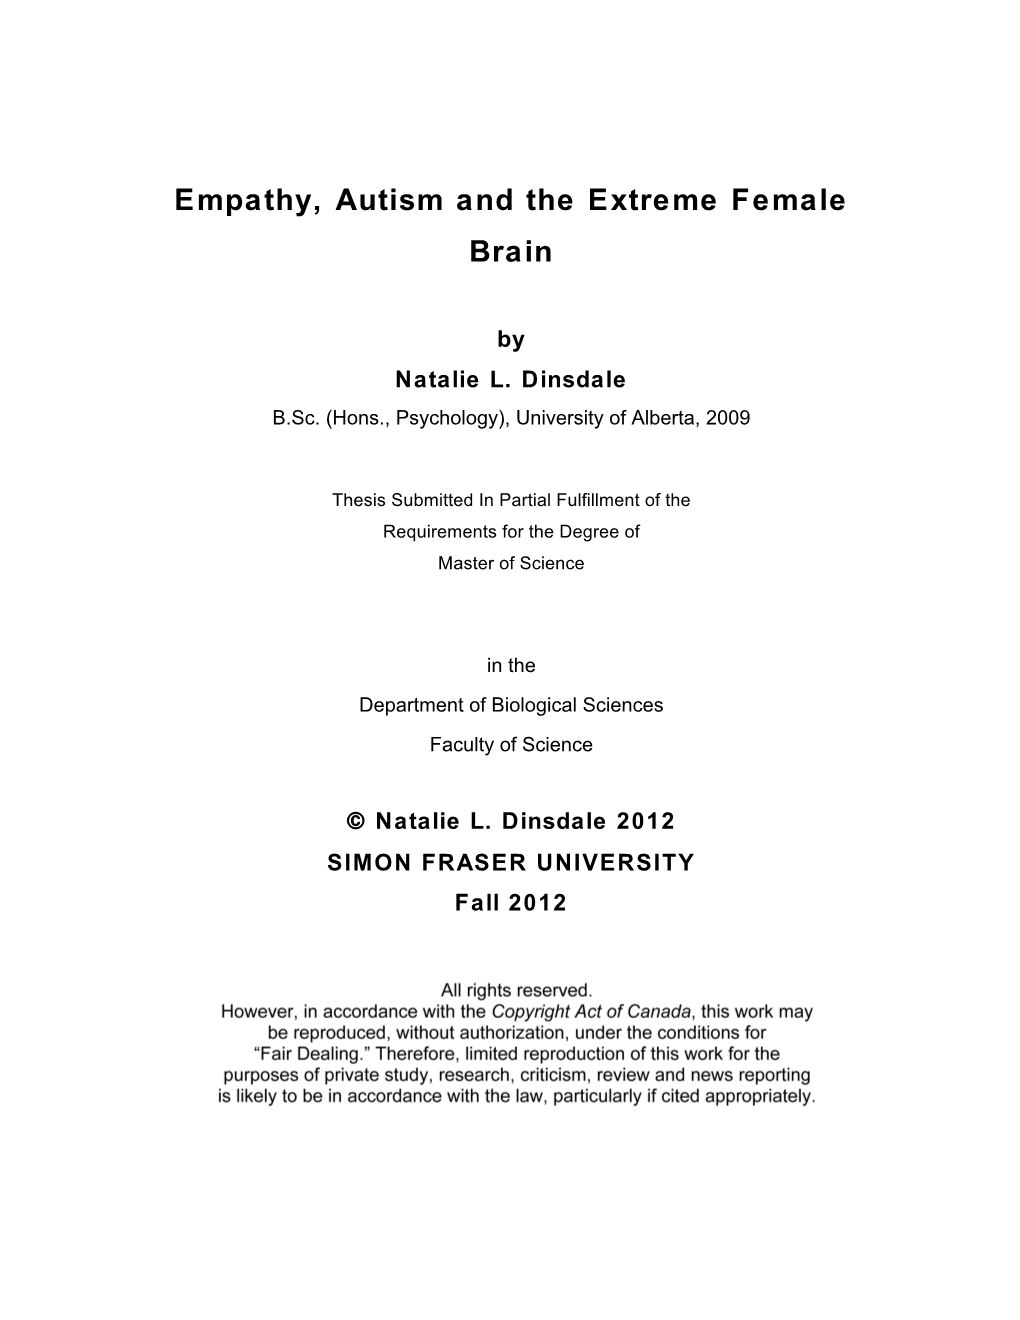 Empathy, Autism and the Extreme Female Brain